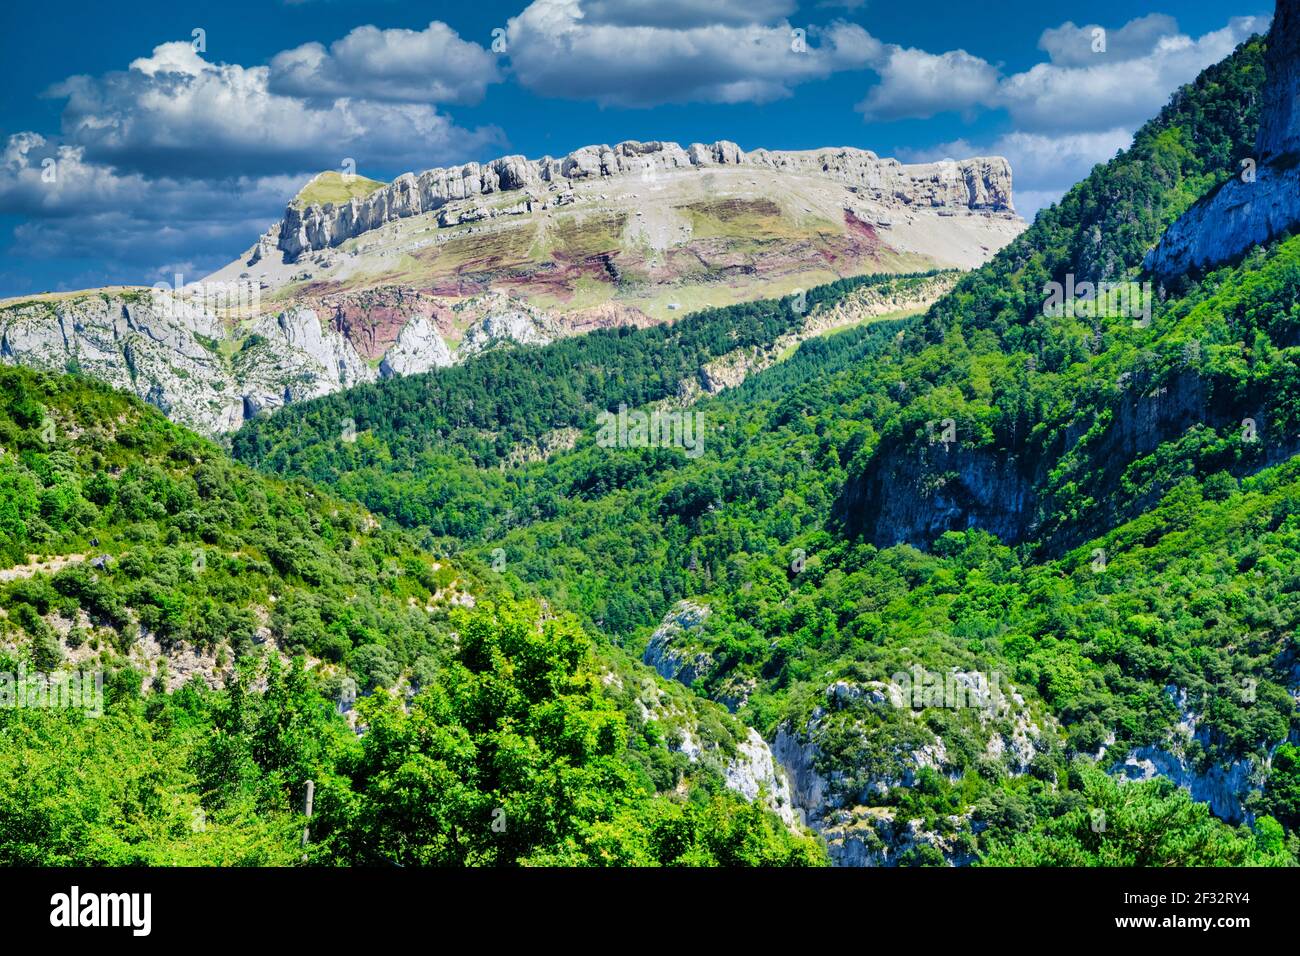 Mountains and forest landscape view. Stock Photo